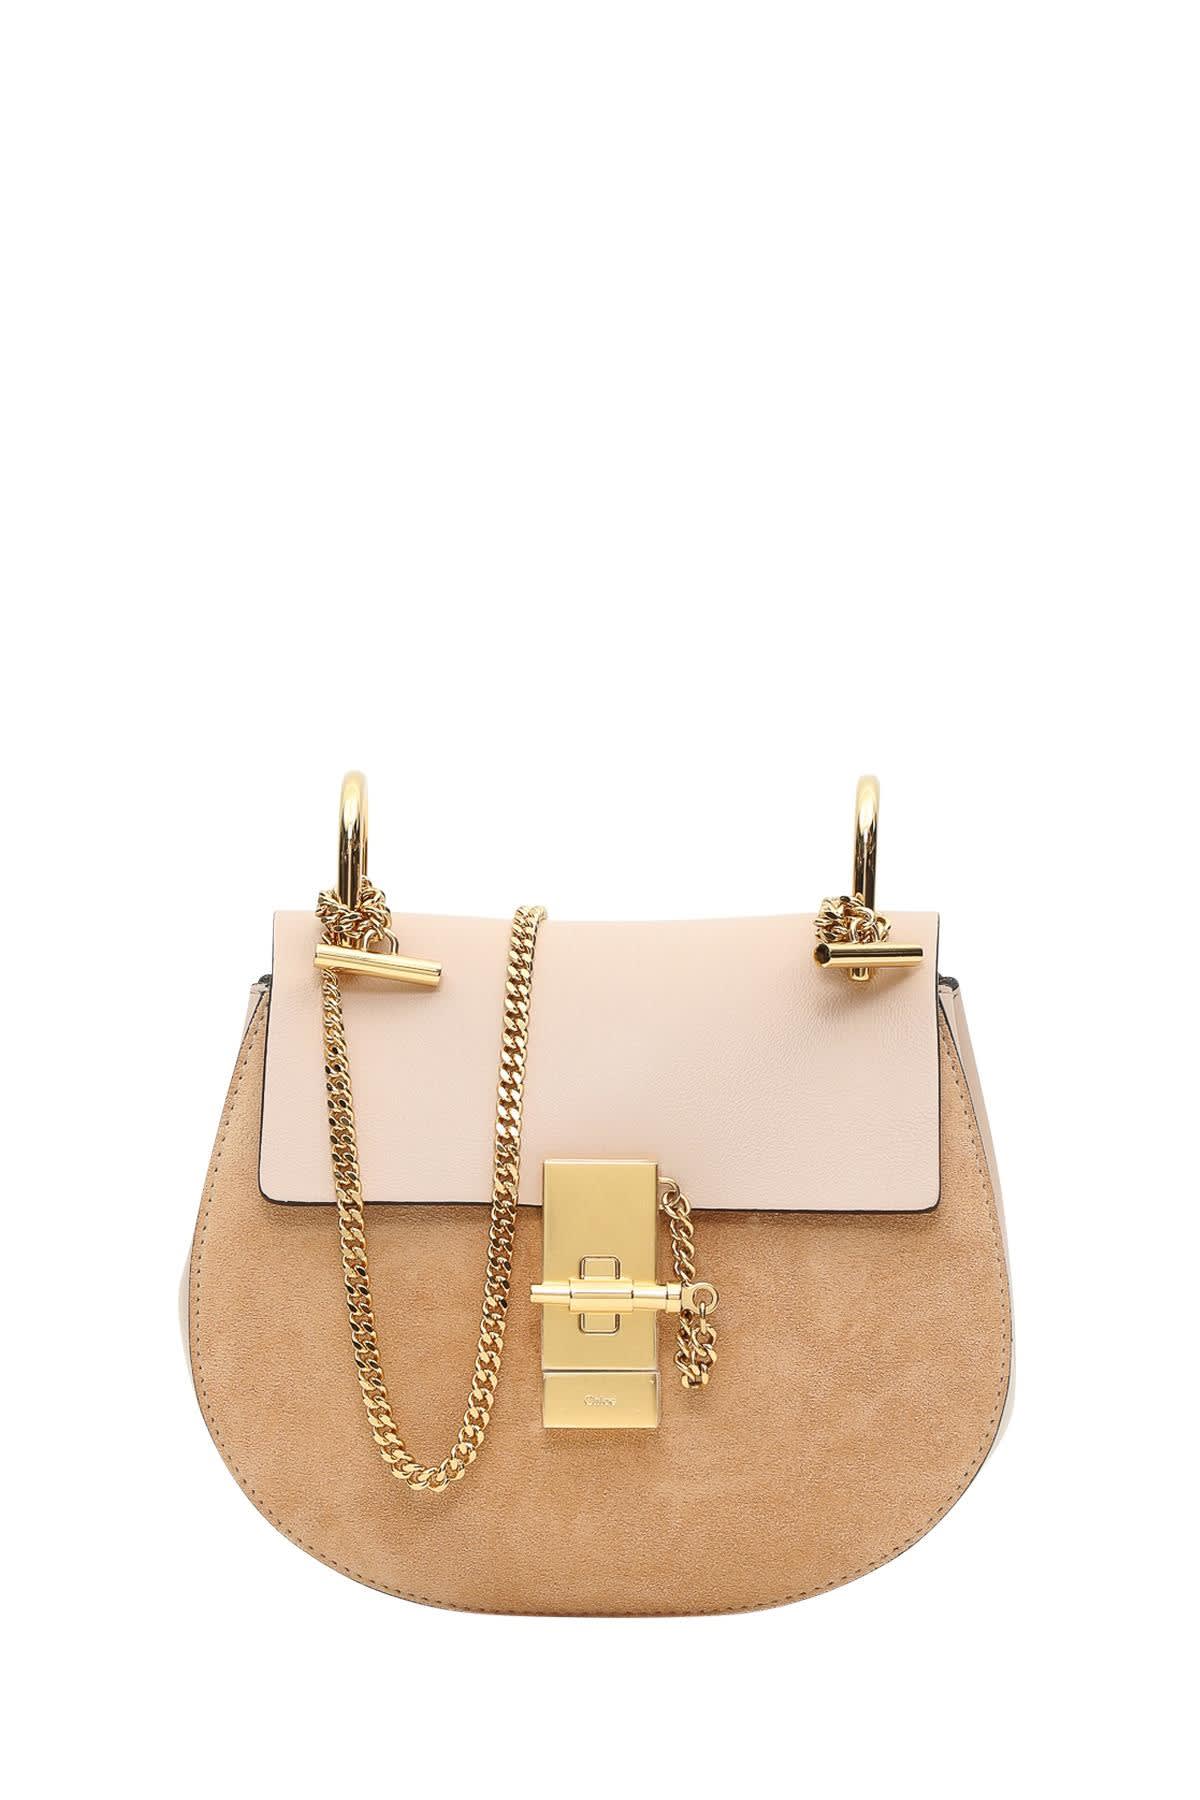 Chloé Leather And Suede Drew Mini Shoulder Bag